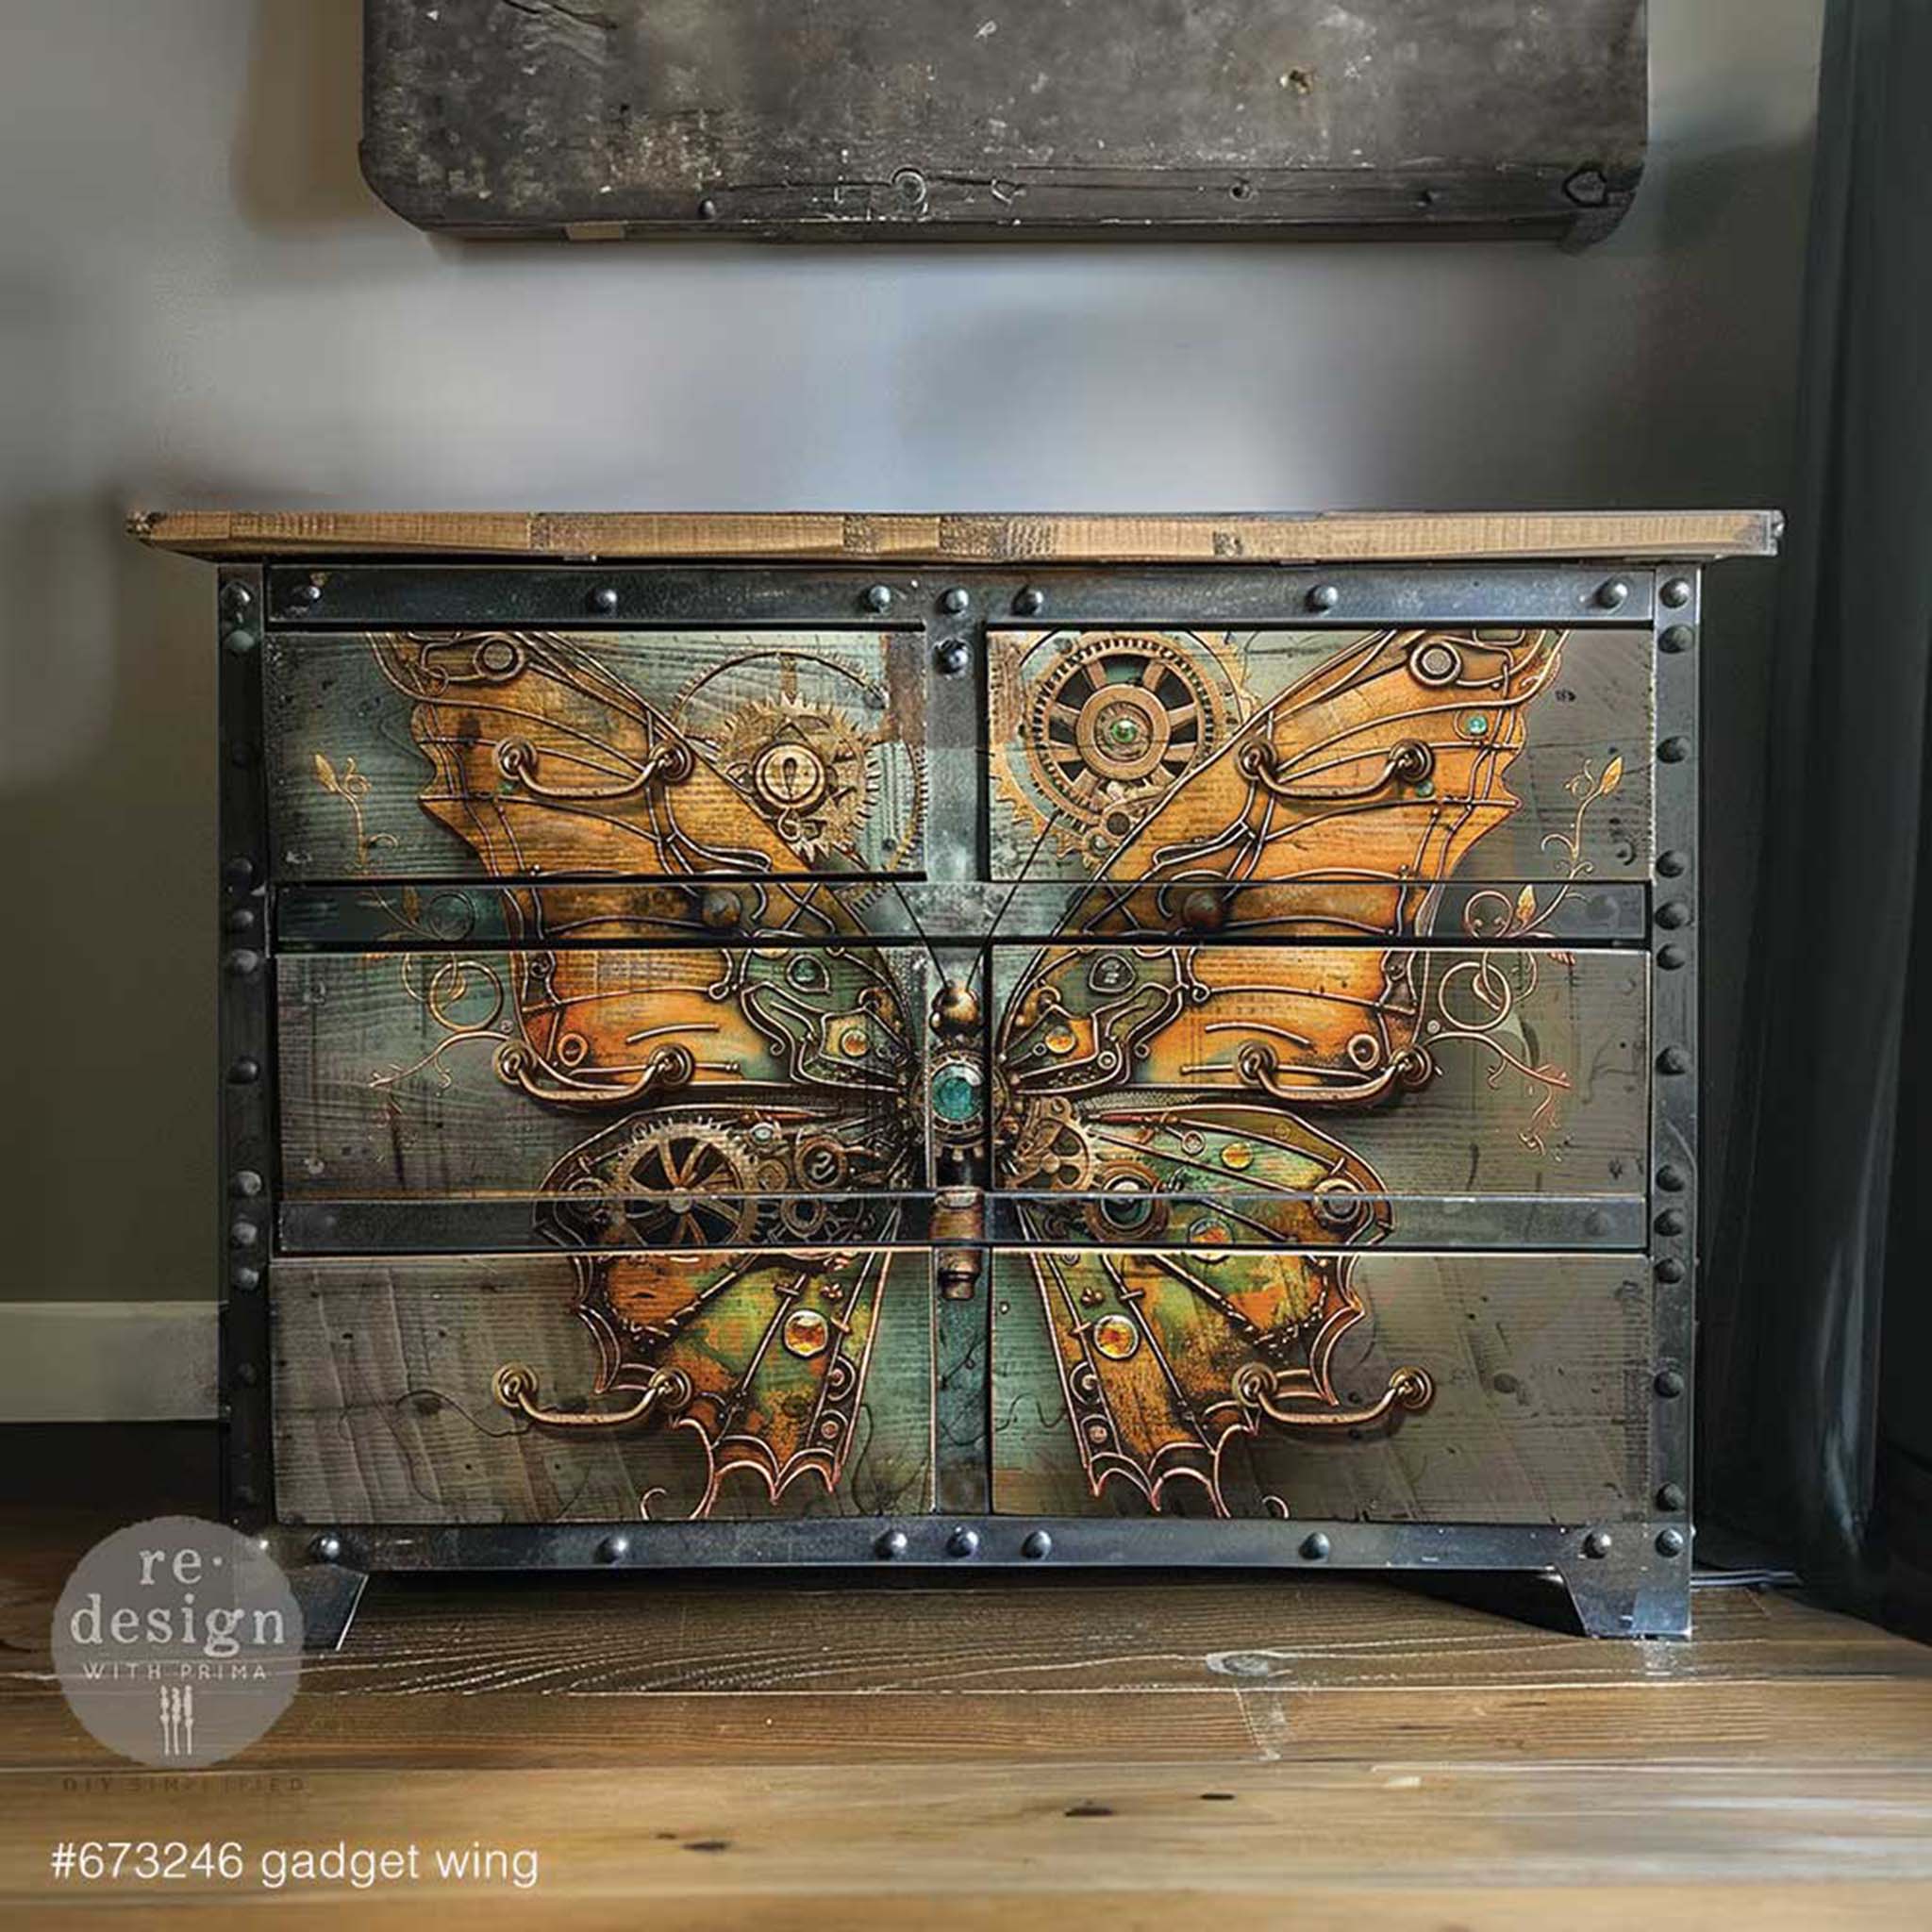 A 6-drawer dresser with an industrial painted look features ReDesign with Prima's Gadget Wing A1 fiber paper on the front.